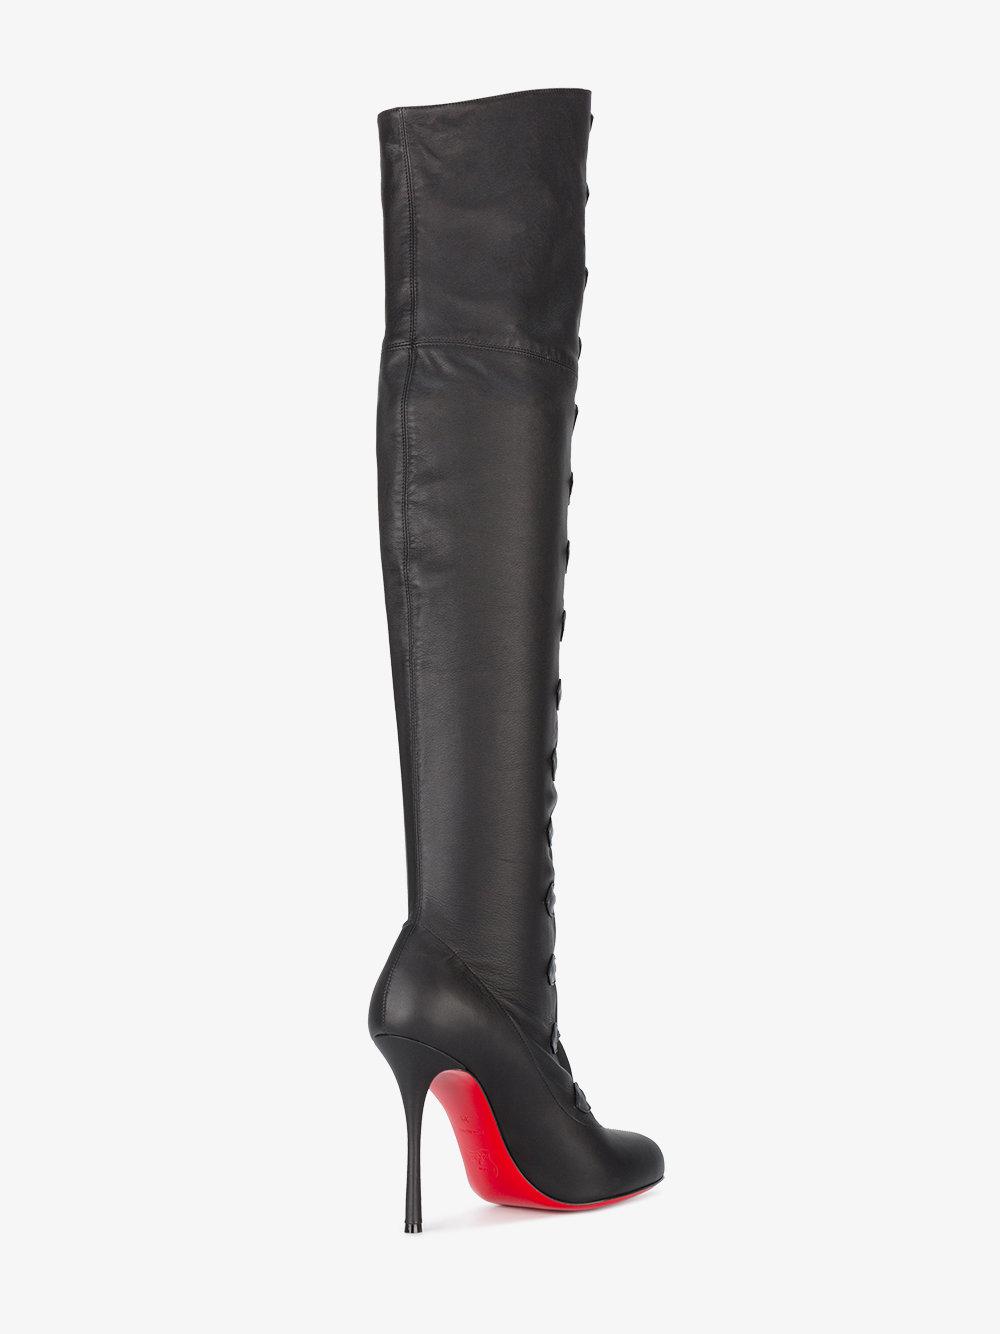 louboutin over knee boots